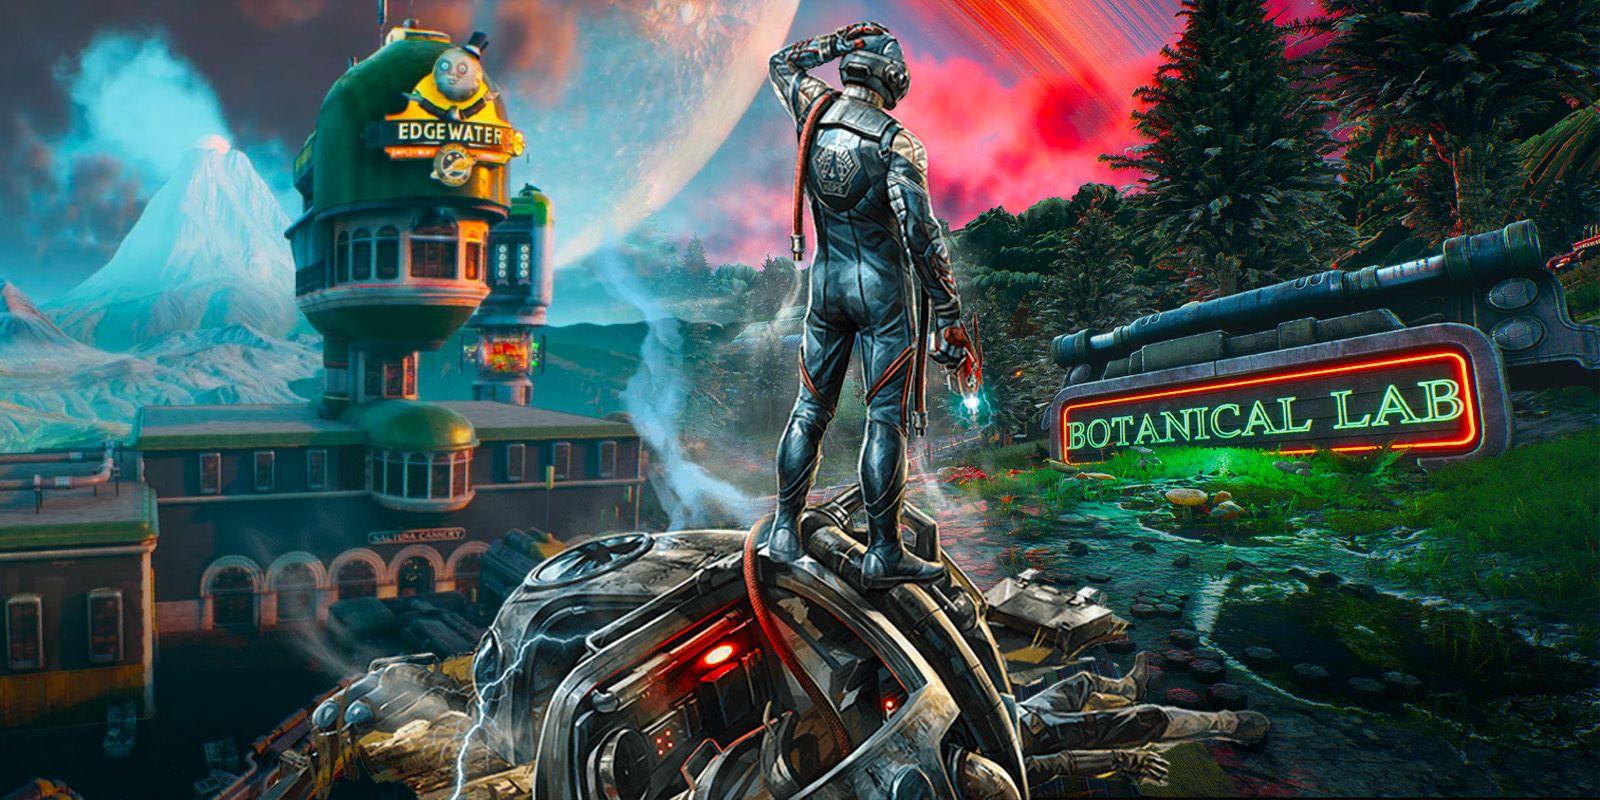 The Outer Worlds: The protagonist standing in between Edgewater and Botanical